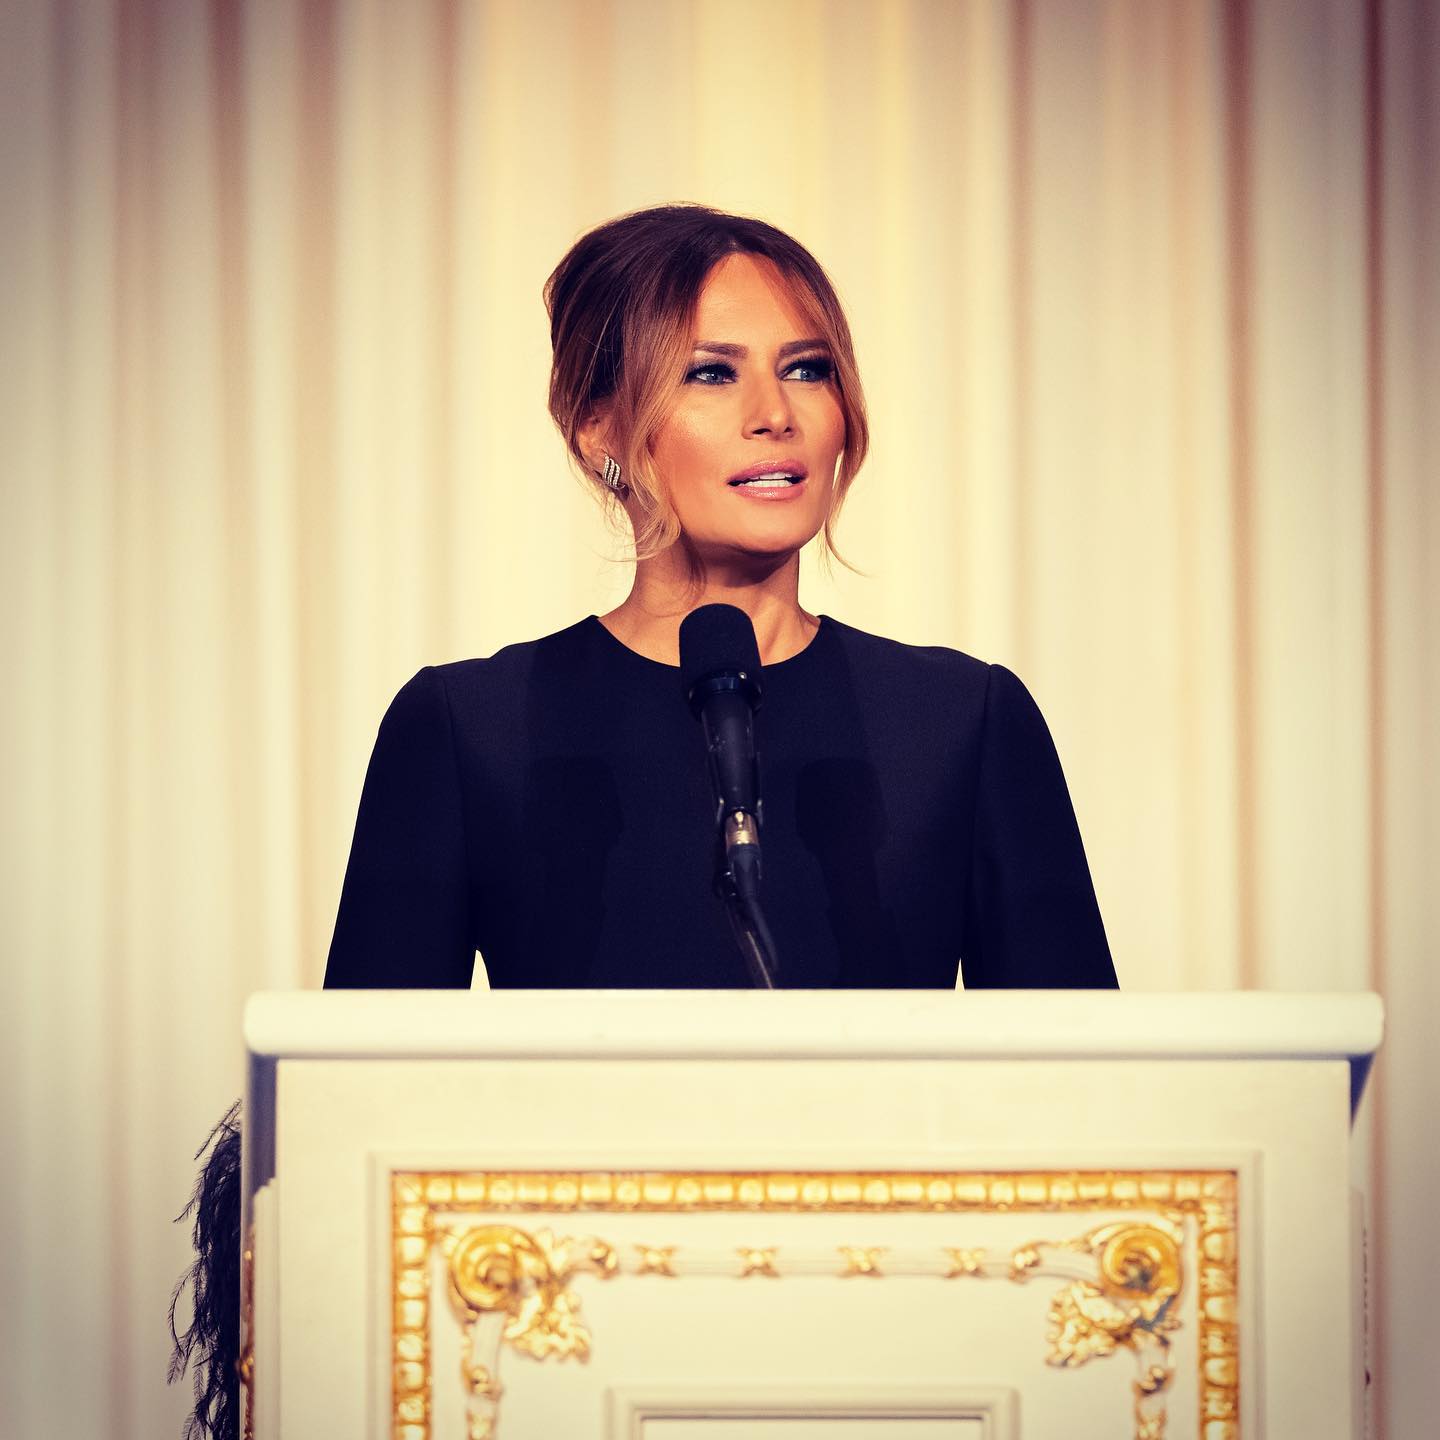 Melania Trump's Auction of Hat Hit by Plunge in Cryptocurrency